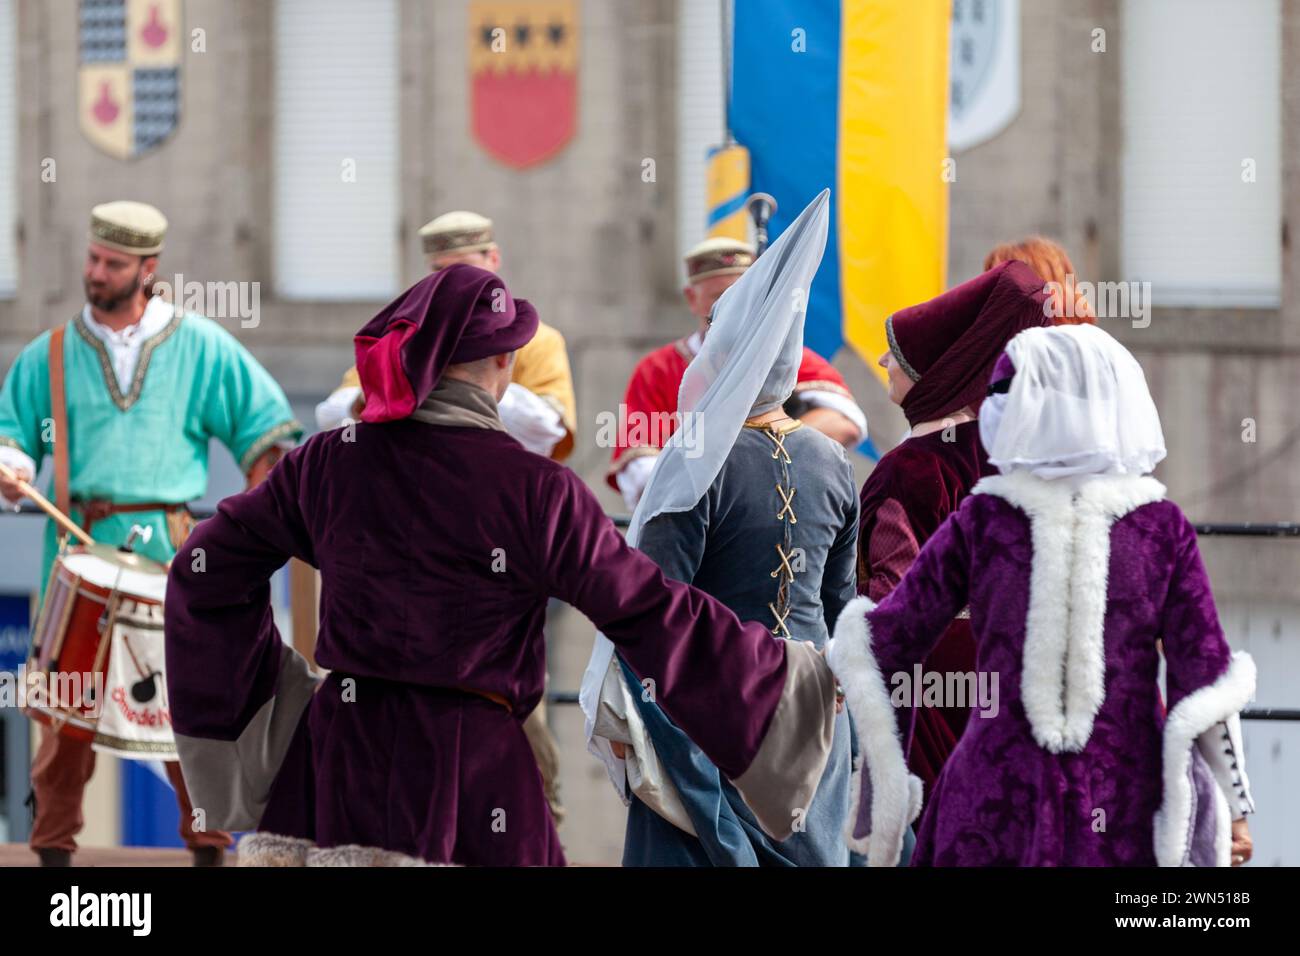 Saint Renan, France - July 16 2023: Group of dancers and troubadours in medieval attire on a platform located on the old market square during the Sain Stock Photo